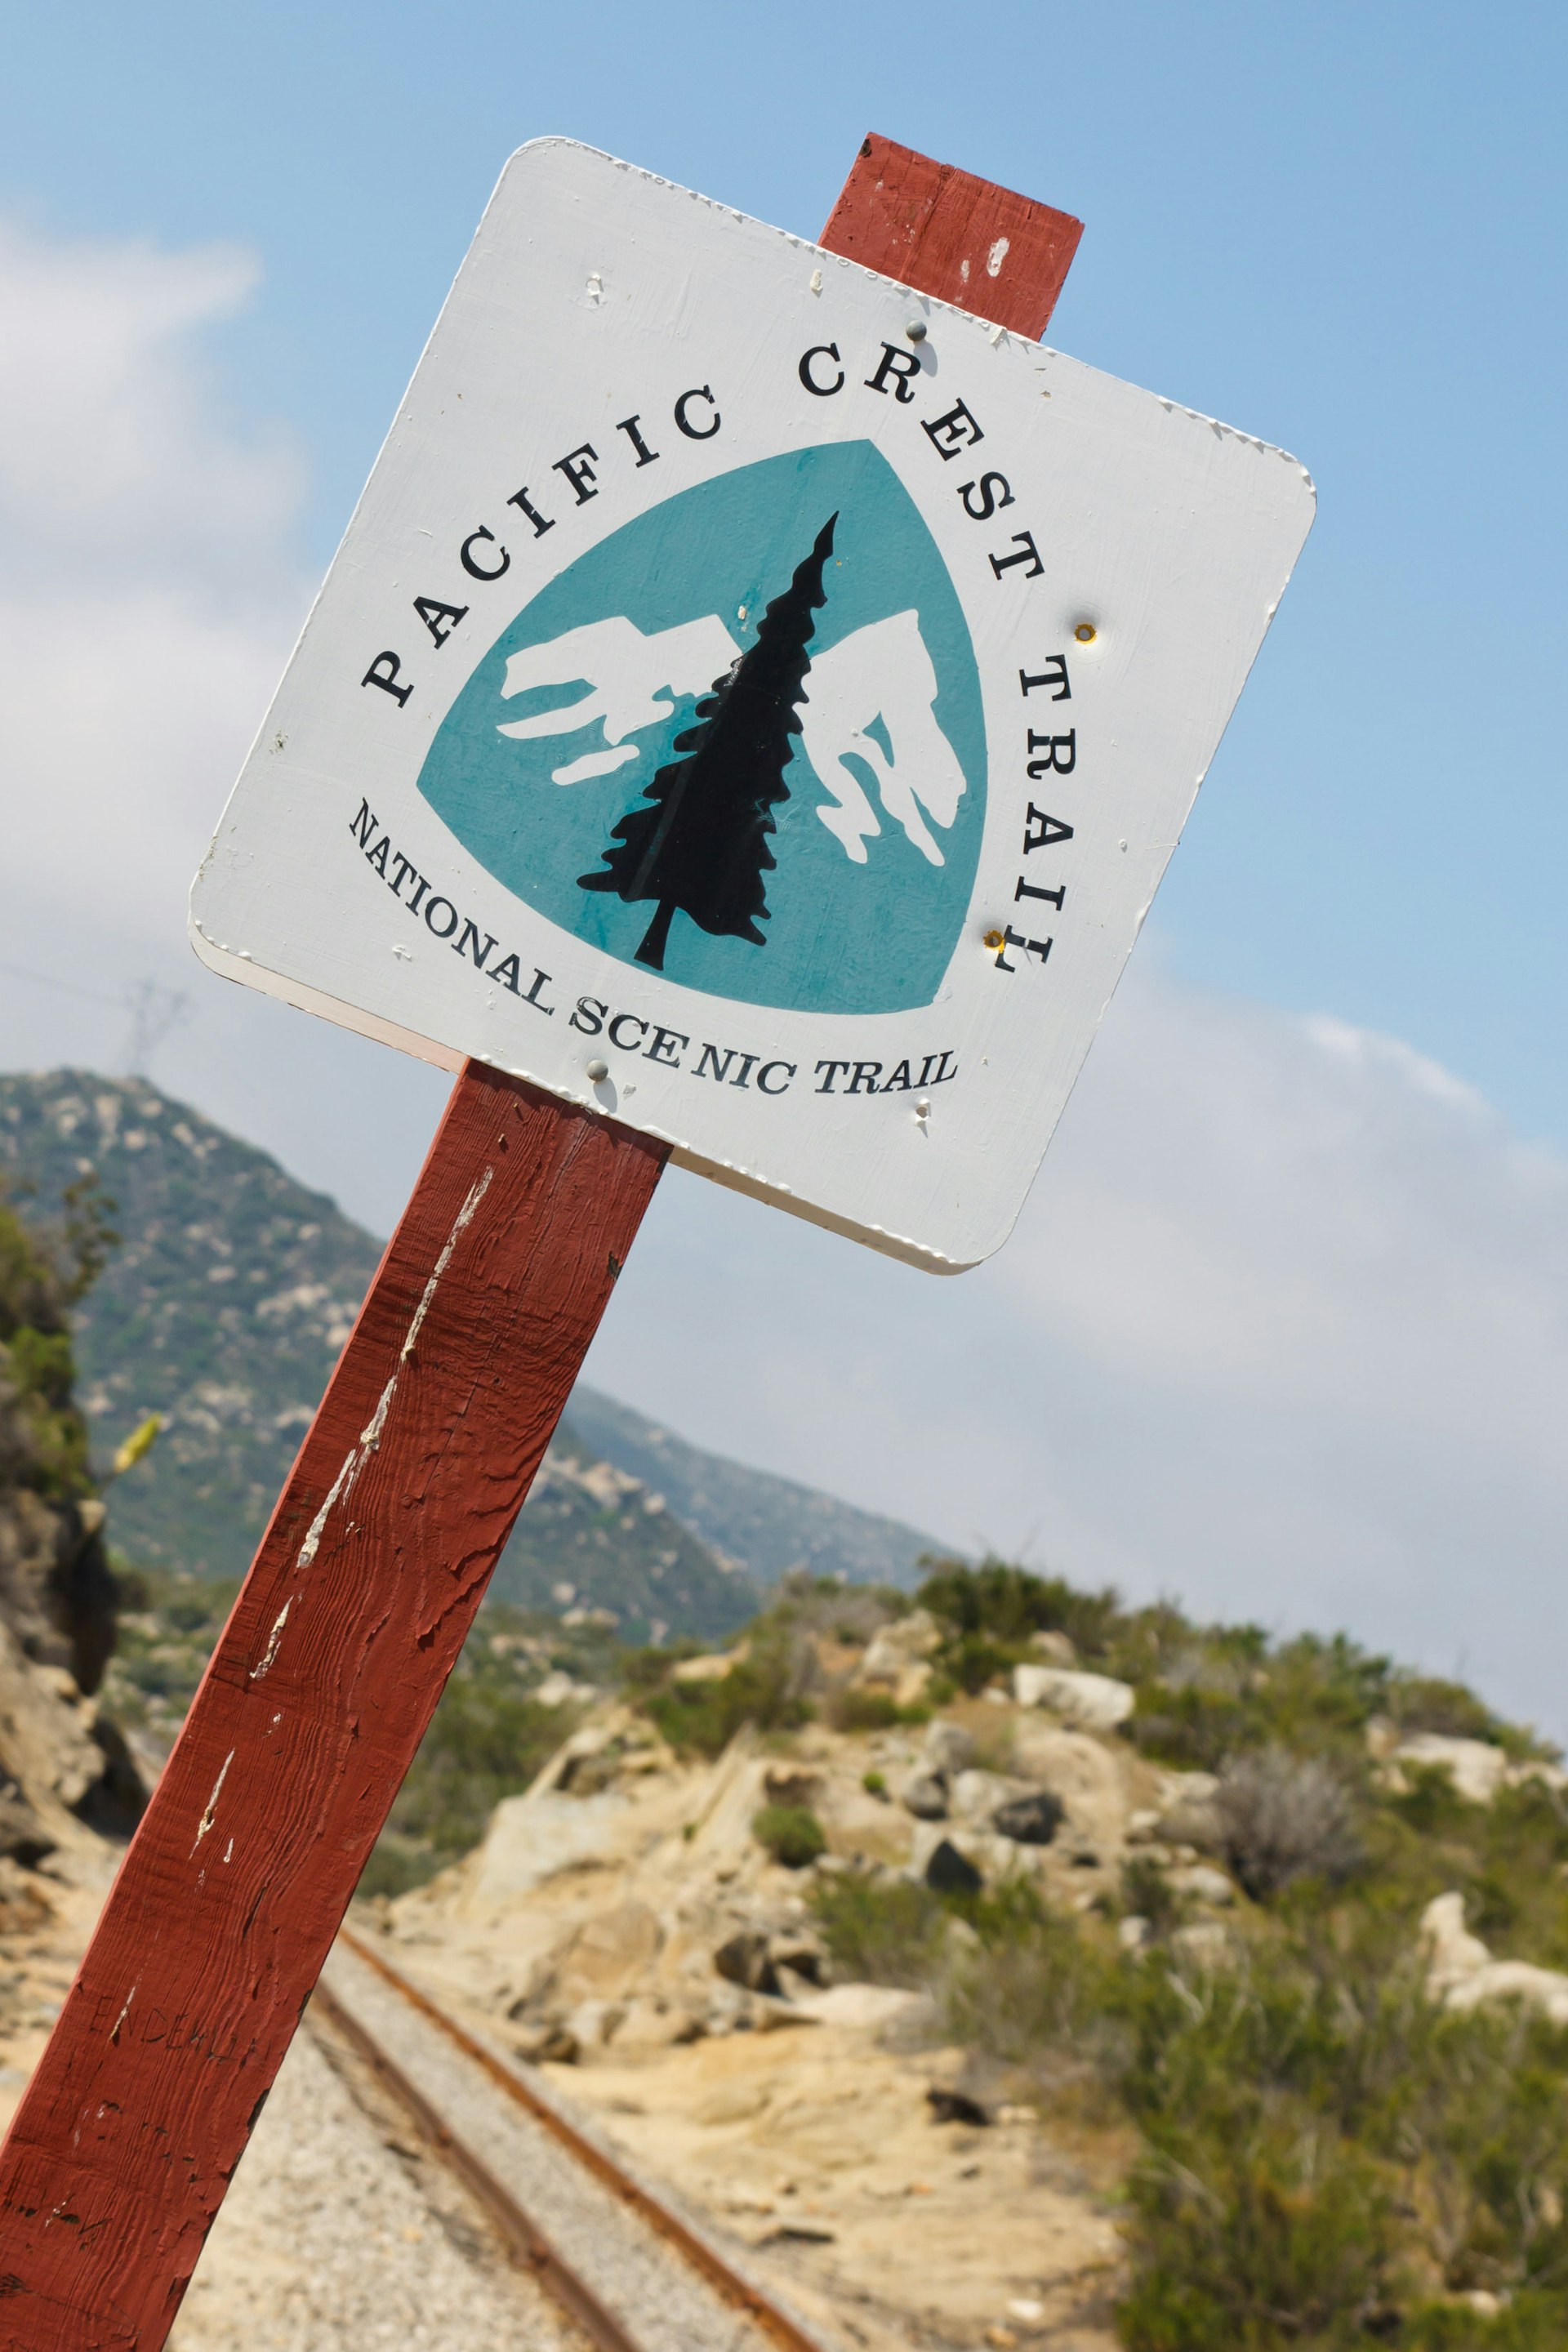 A sign reading "Pacific Crest Trail" against a blue background